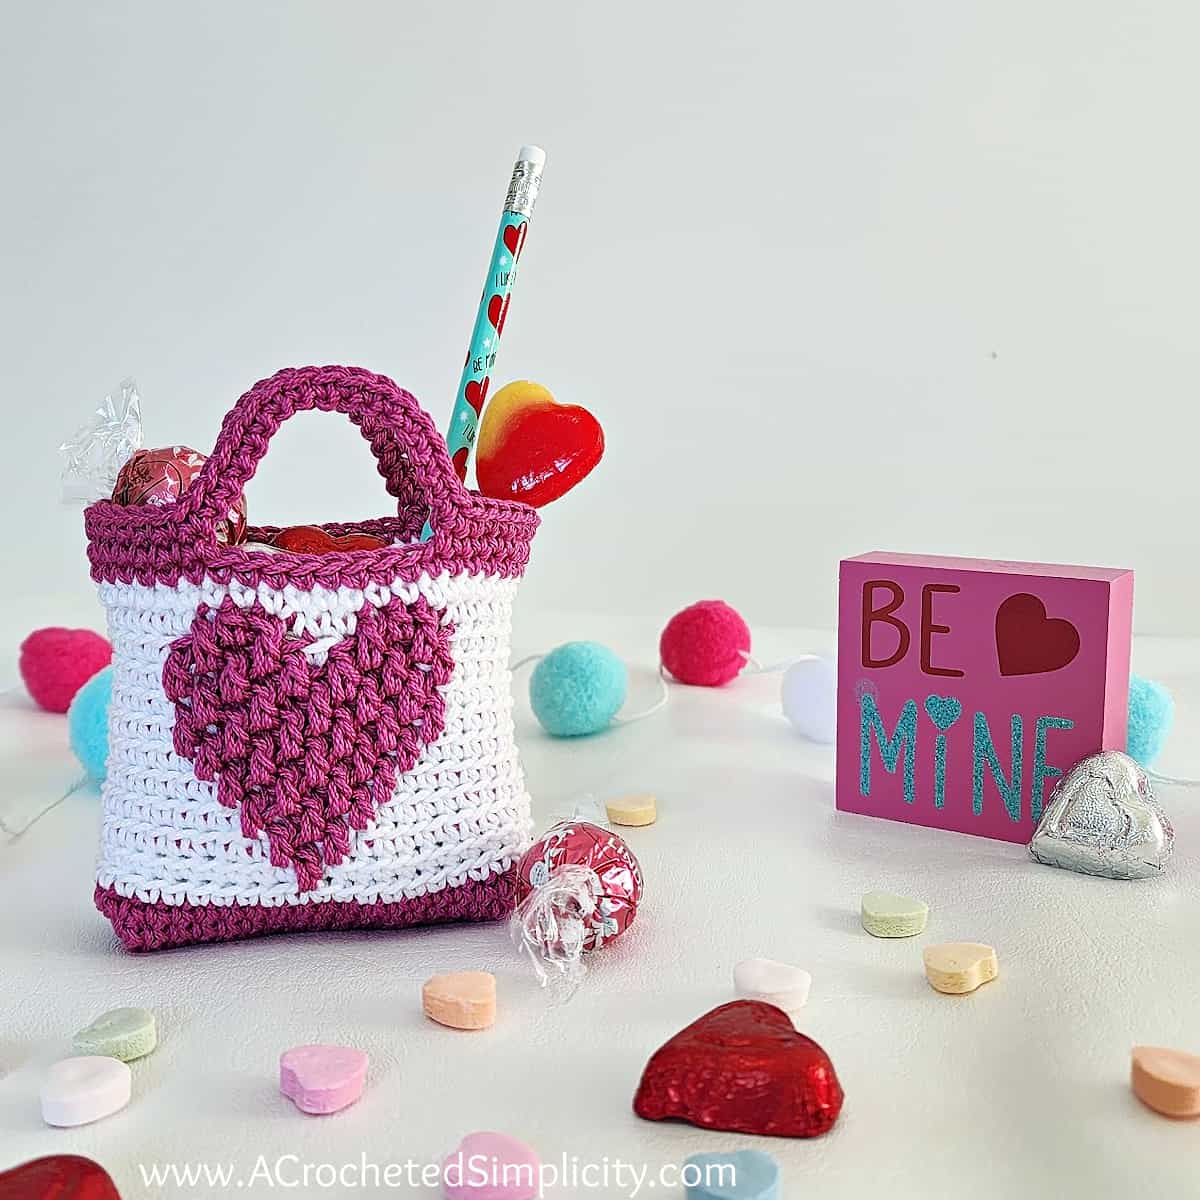 Mini crochet Valentine treat bag in white with a medium pink heart. Small candies scattered on the table.